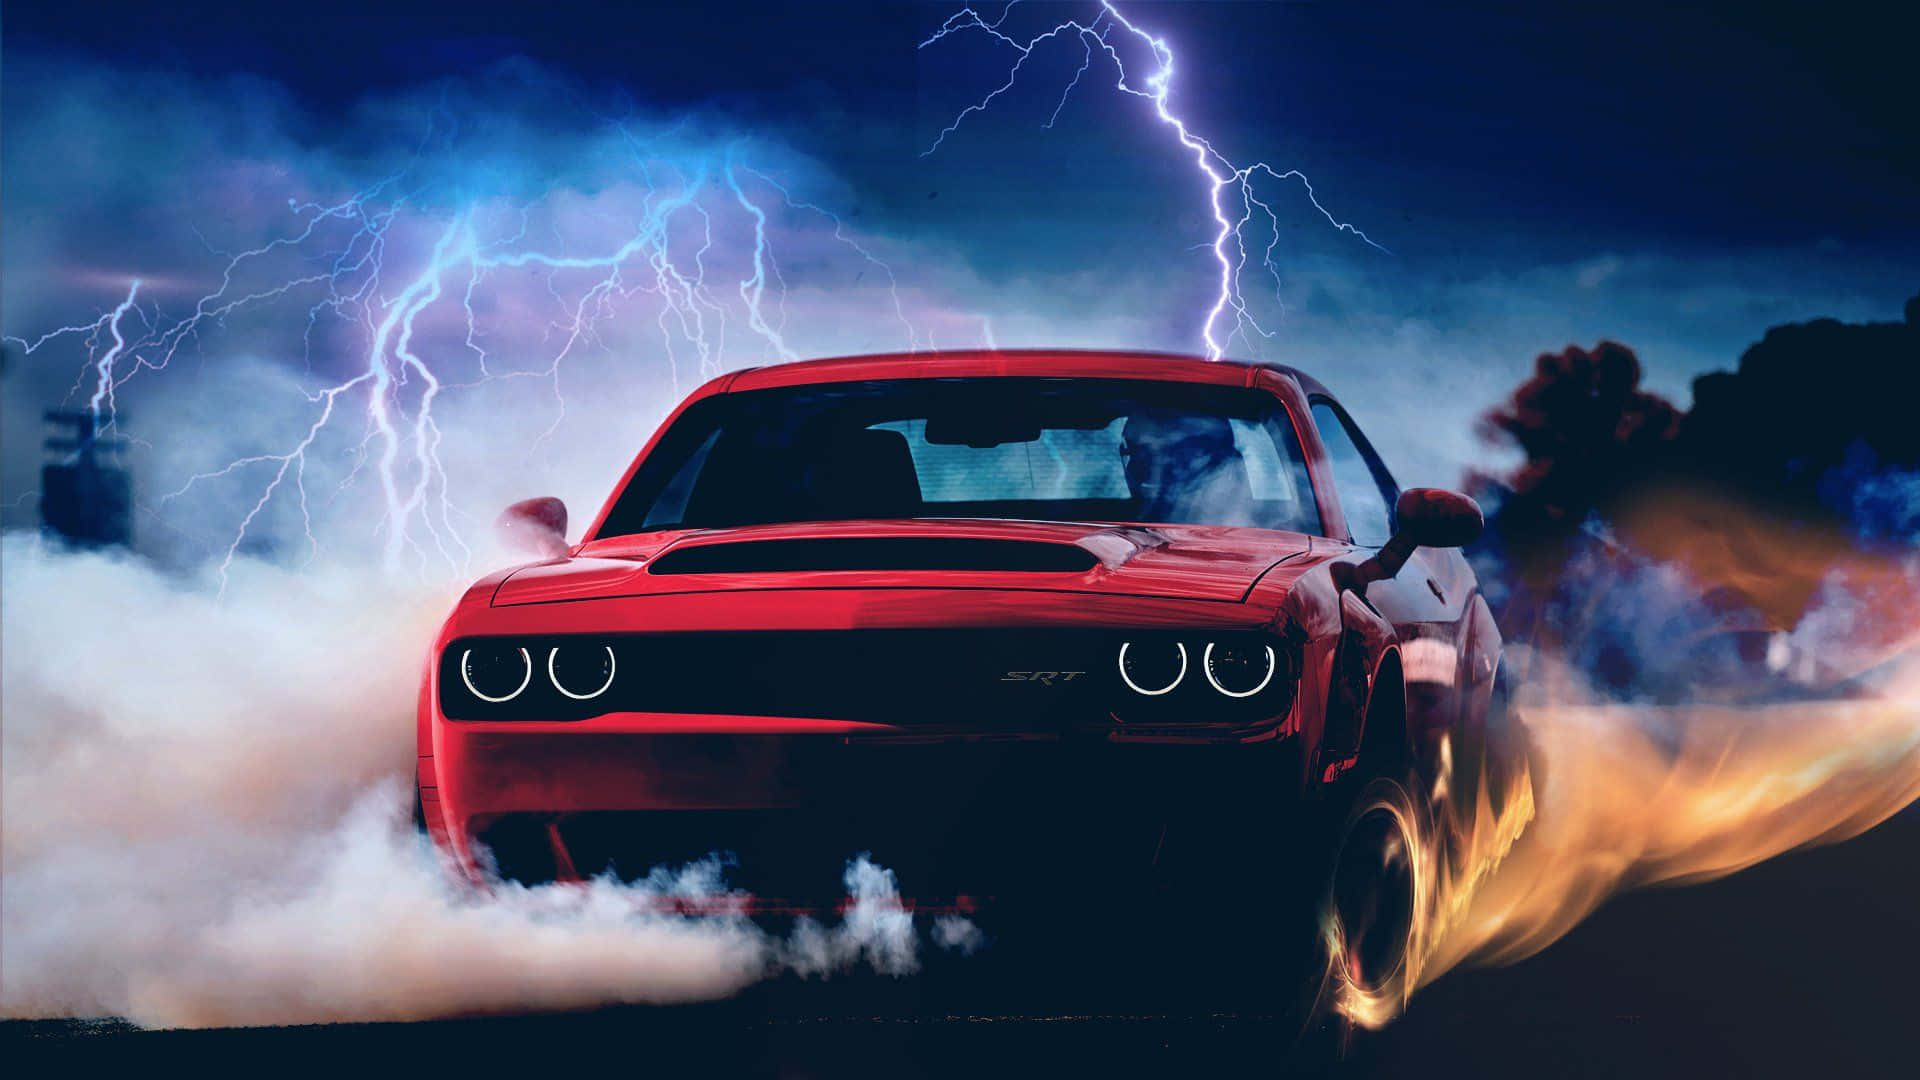 The Unstoppable Hellcat Wallpaper